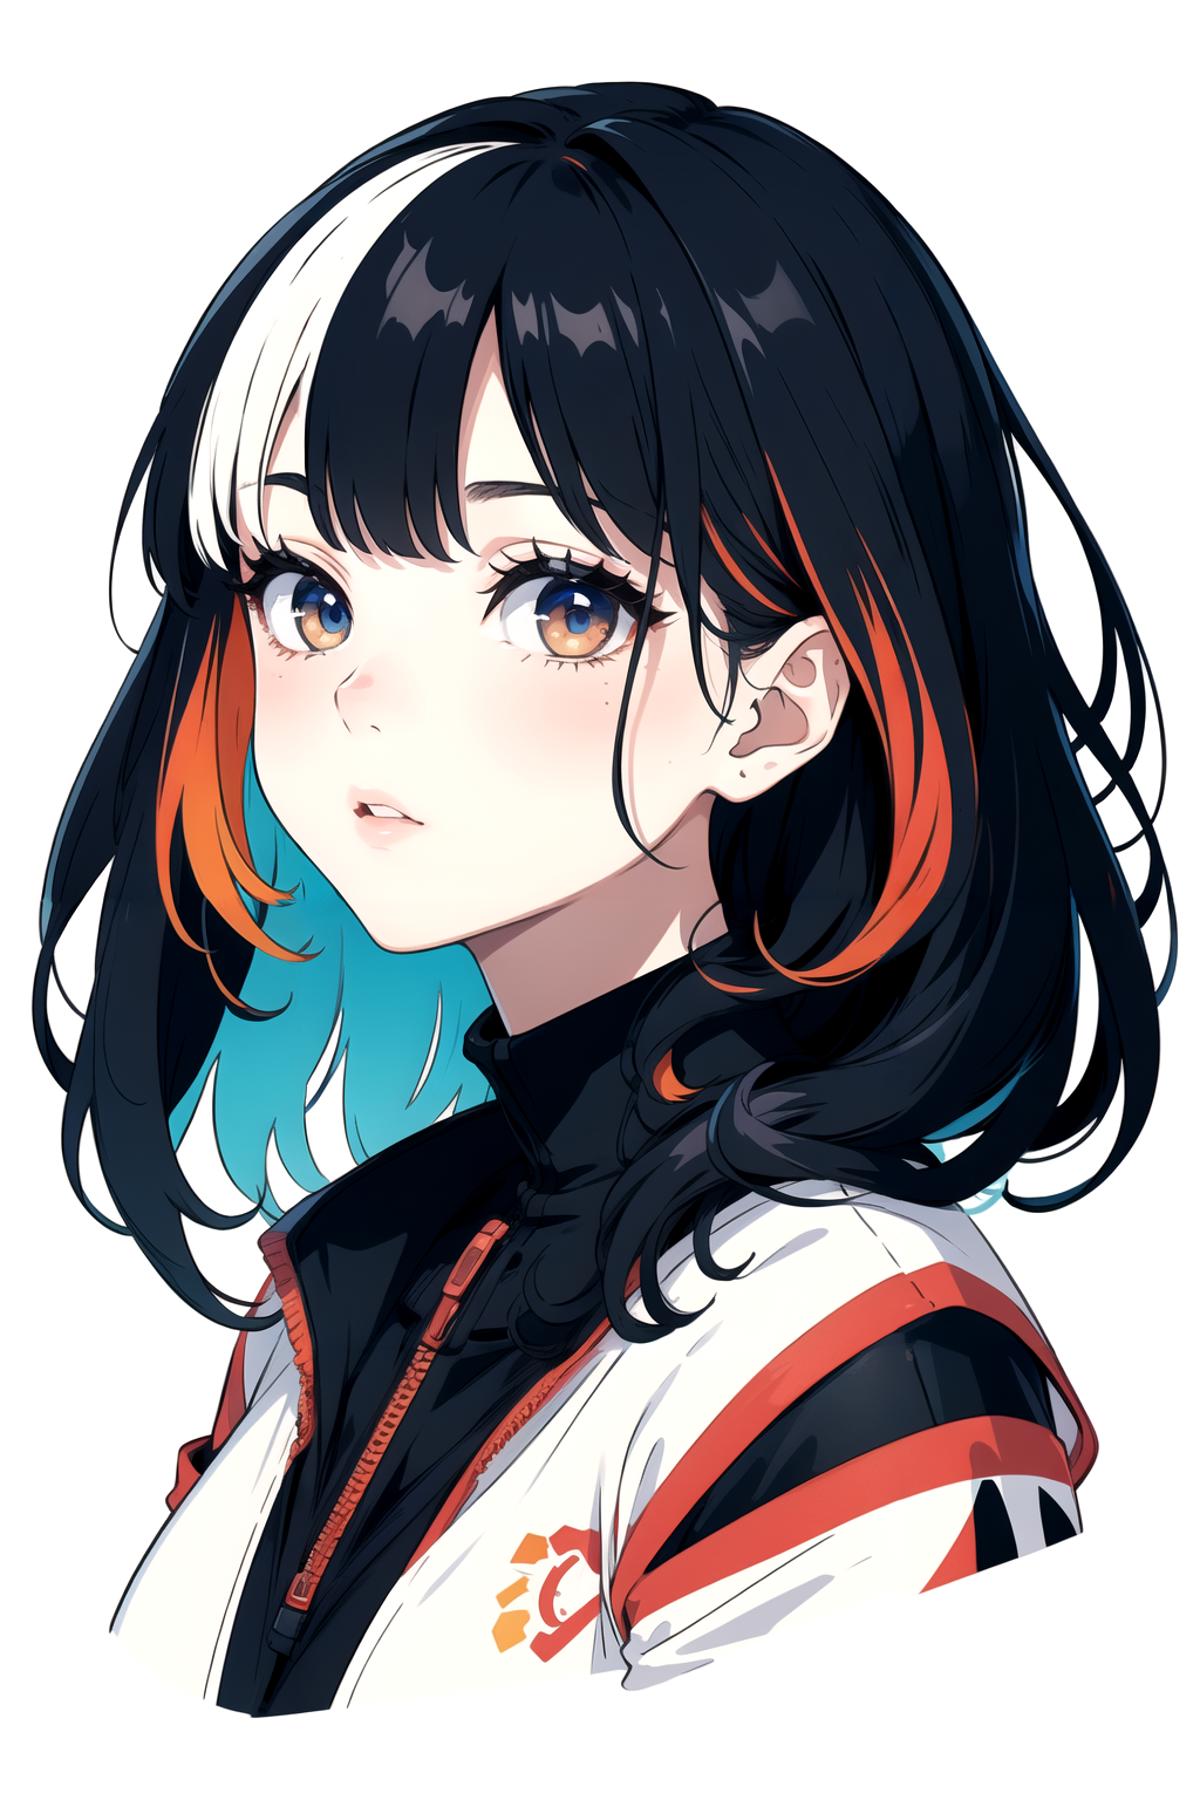 Anime character with black hair and white streak on forehead.